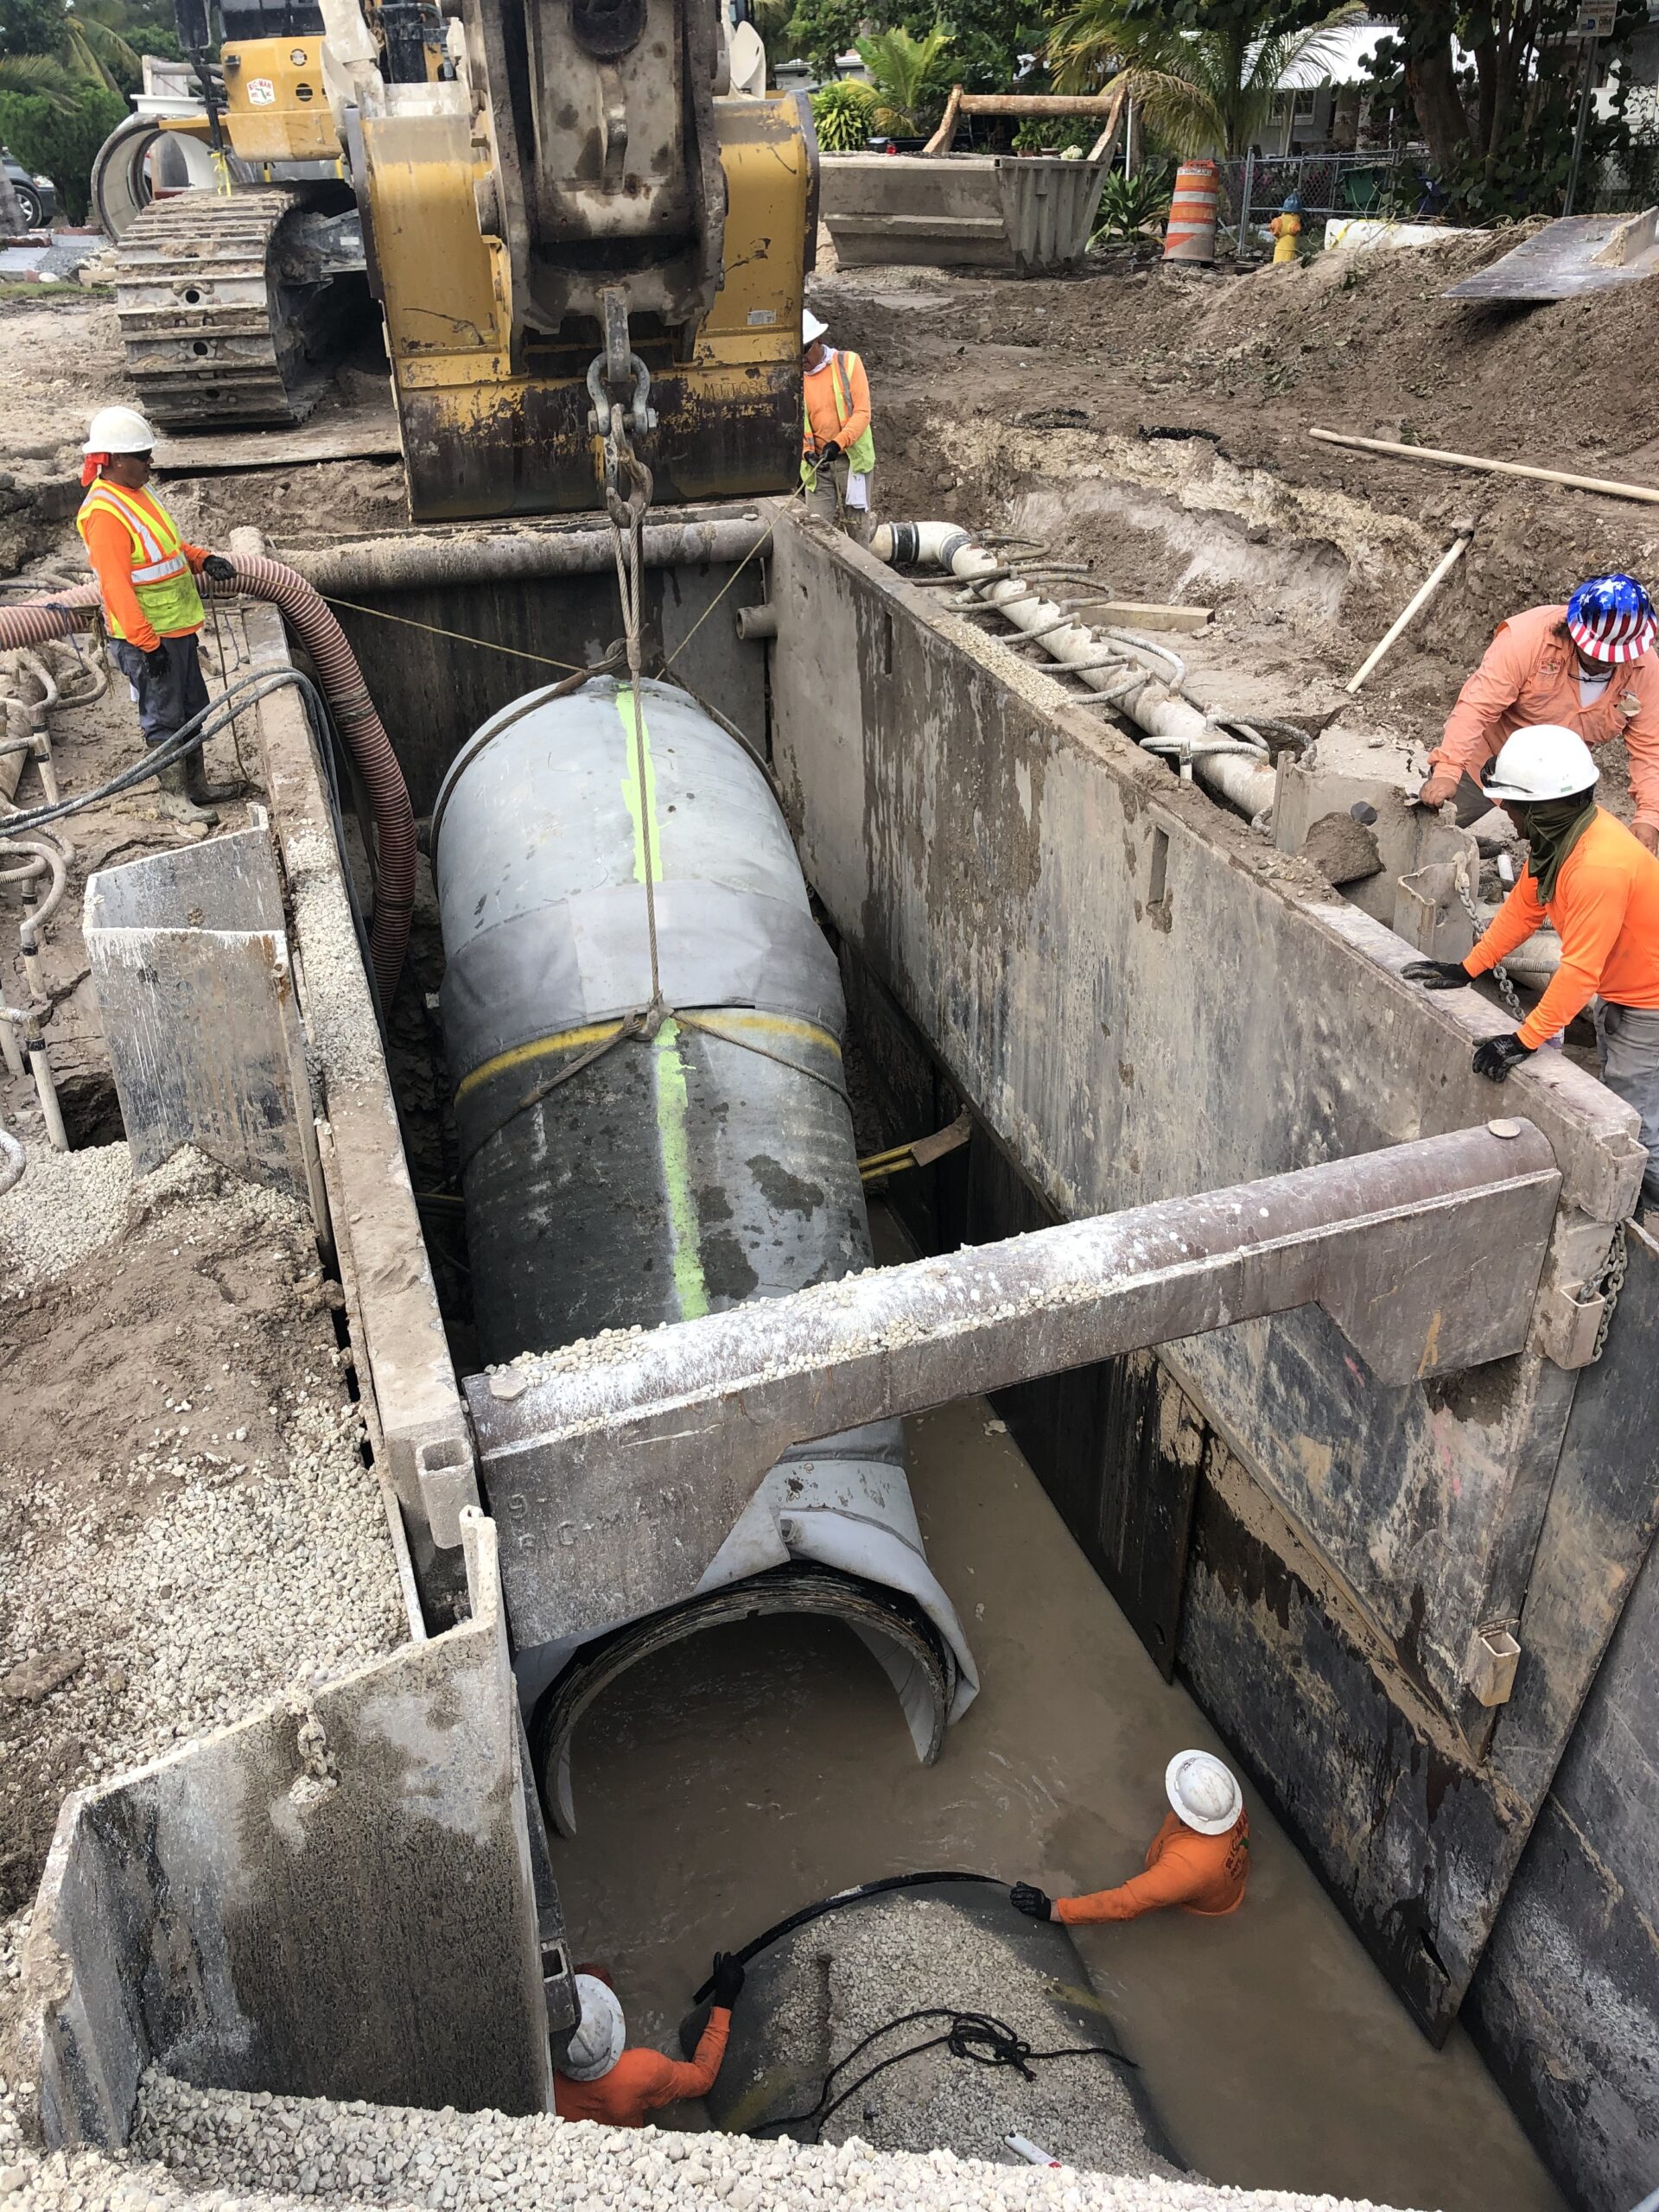 NL1-A 60-inch Diameter Sanitary Sewer Transmission Pipeline (PCCP) Force Main 5 Carley Smith